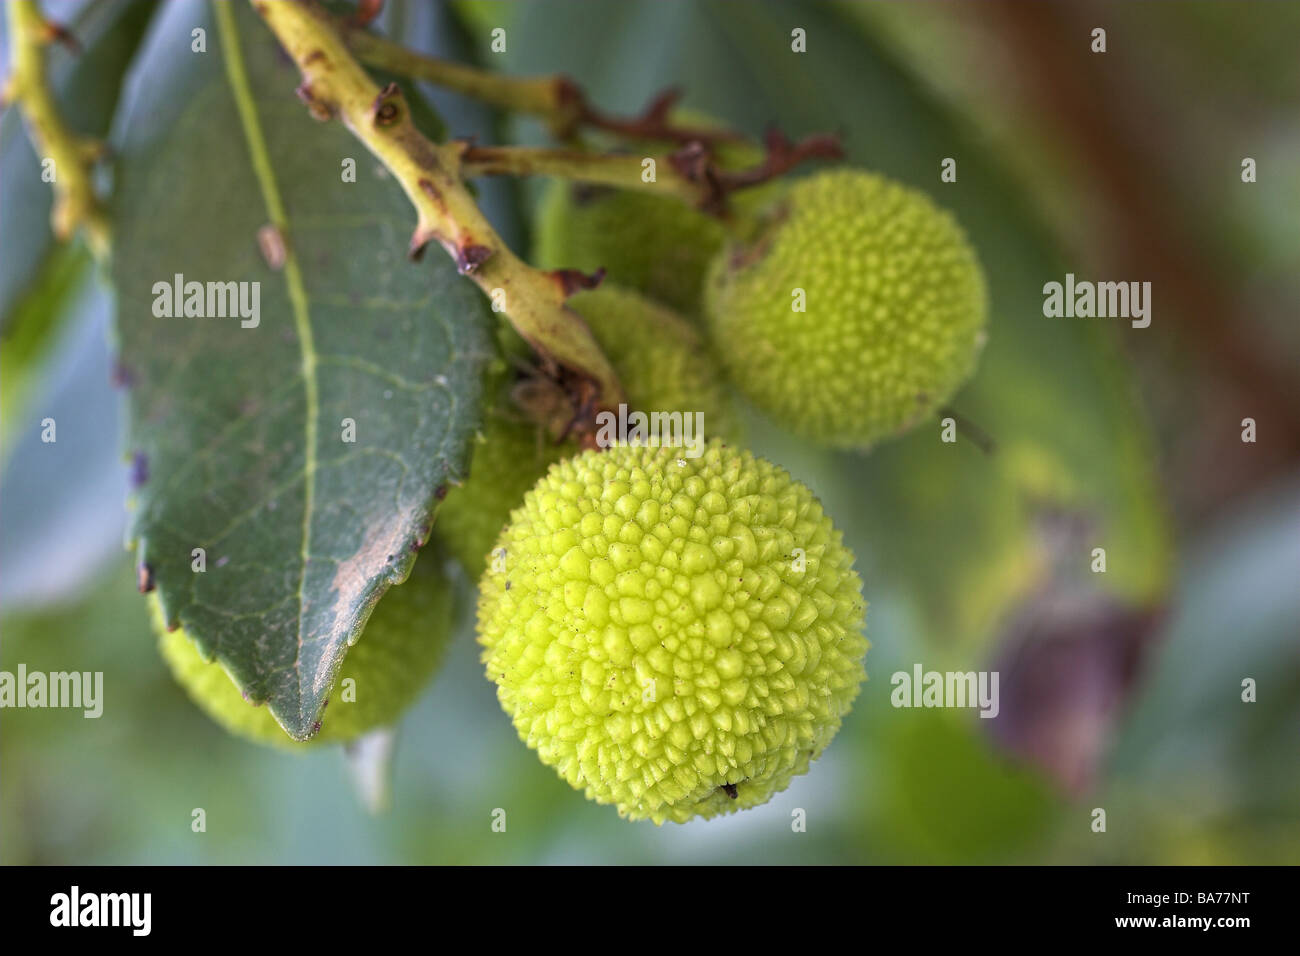 Tree fruits close-up tree branch leaves fruit-stand round green unripe  surface structure nature botany plant detail Italy Stock Photo - Alamy